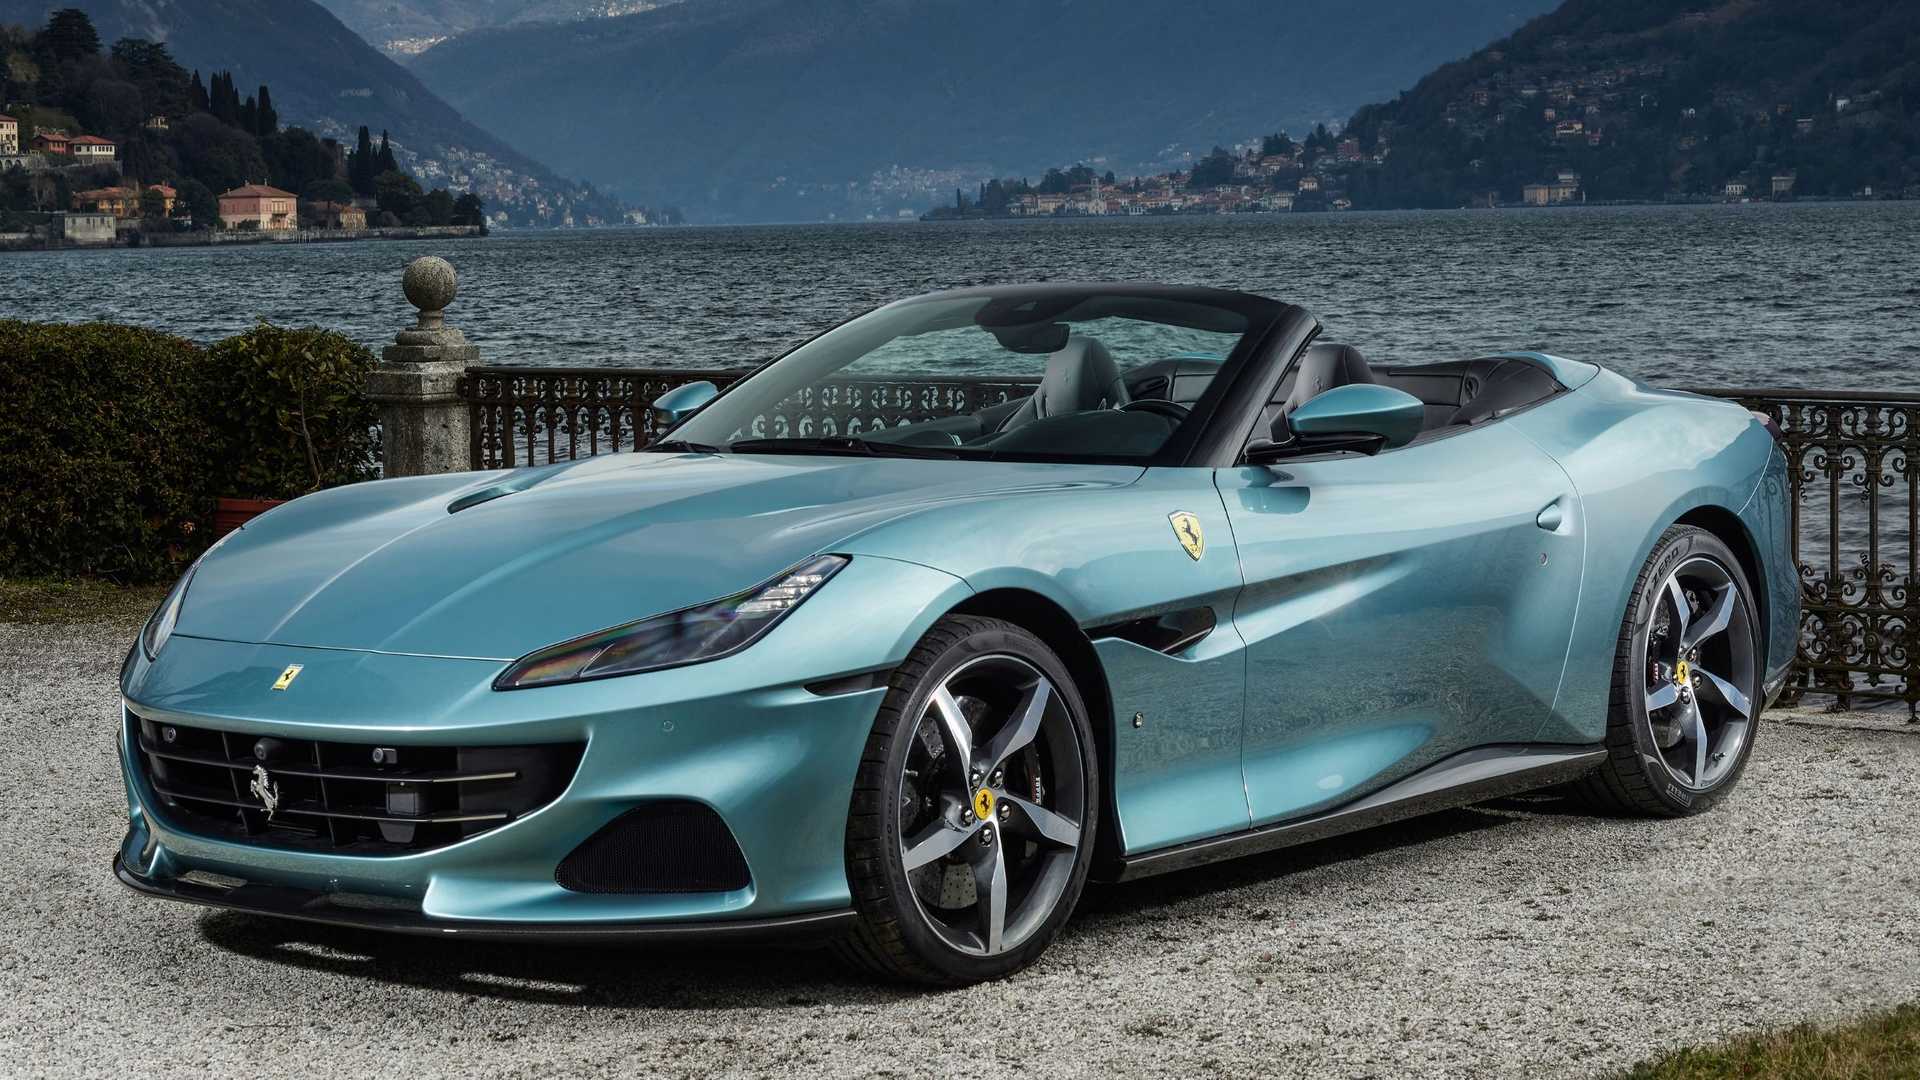 The Ferrari Portofino M is among a group of cars being discontinued this year